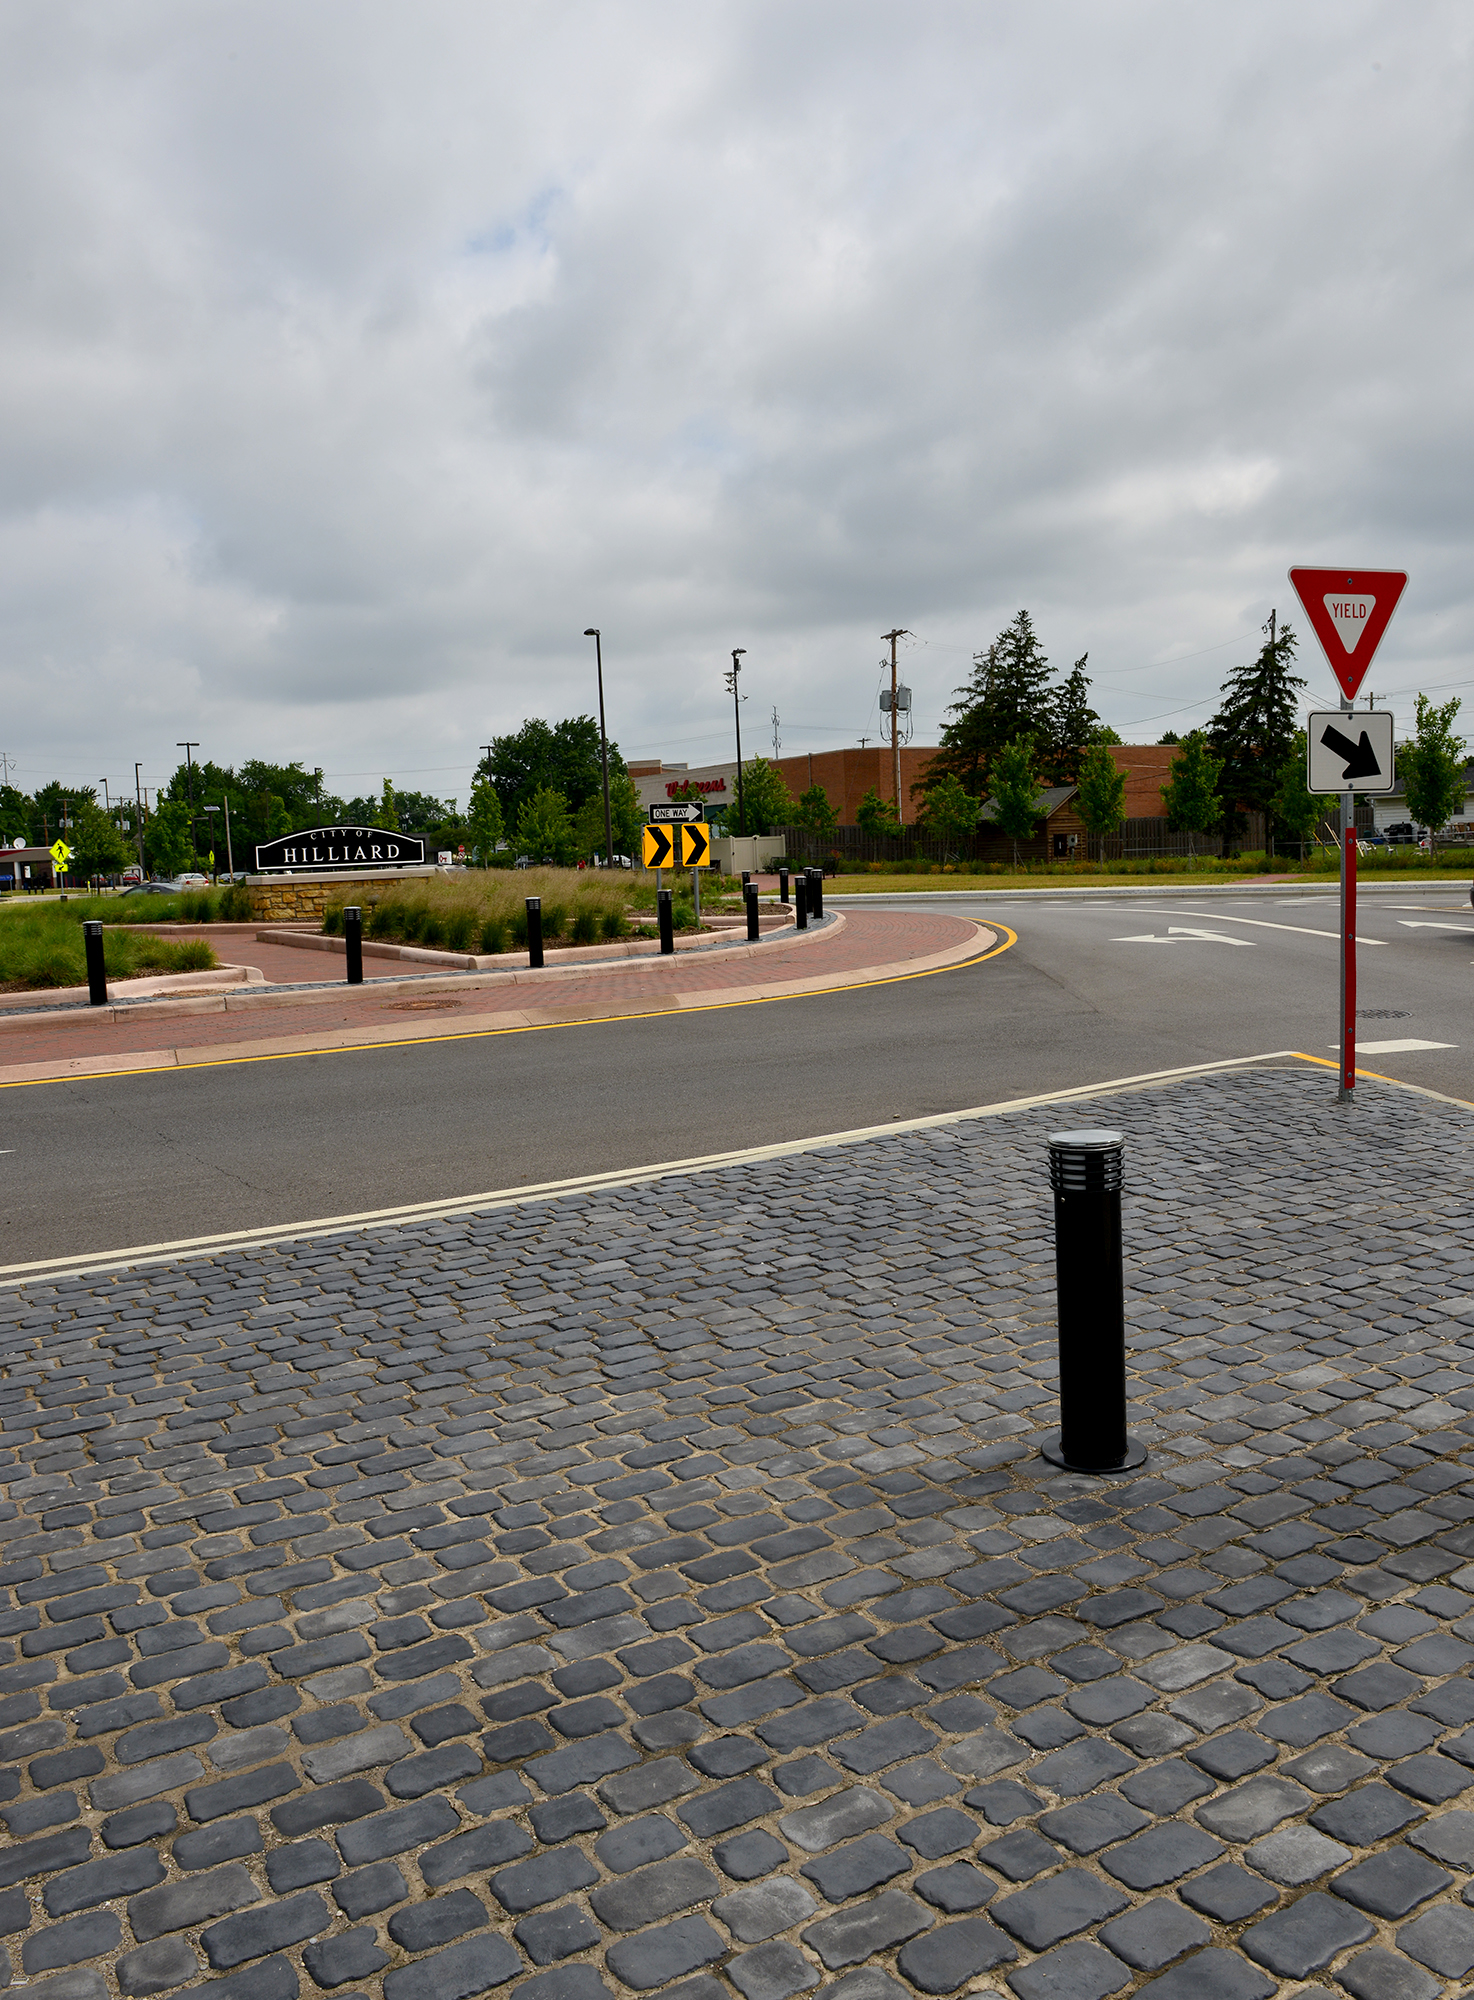 Pavers used in the central island of the roundabout visually contrast with two-toned Courtstone pavers on the outside of the circle.